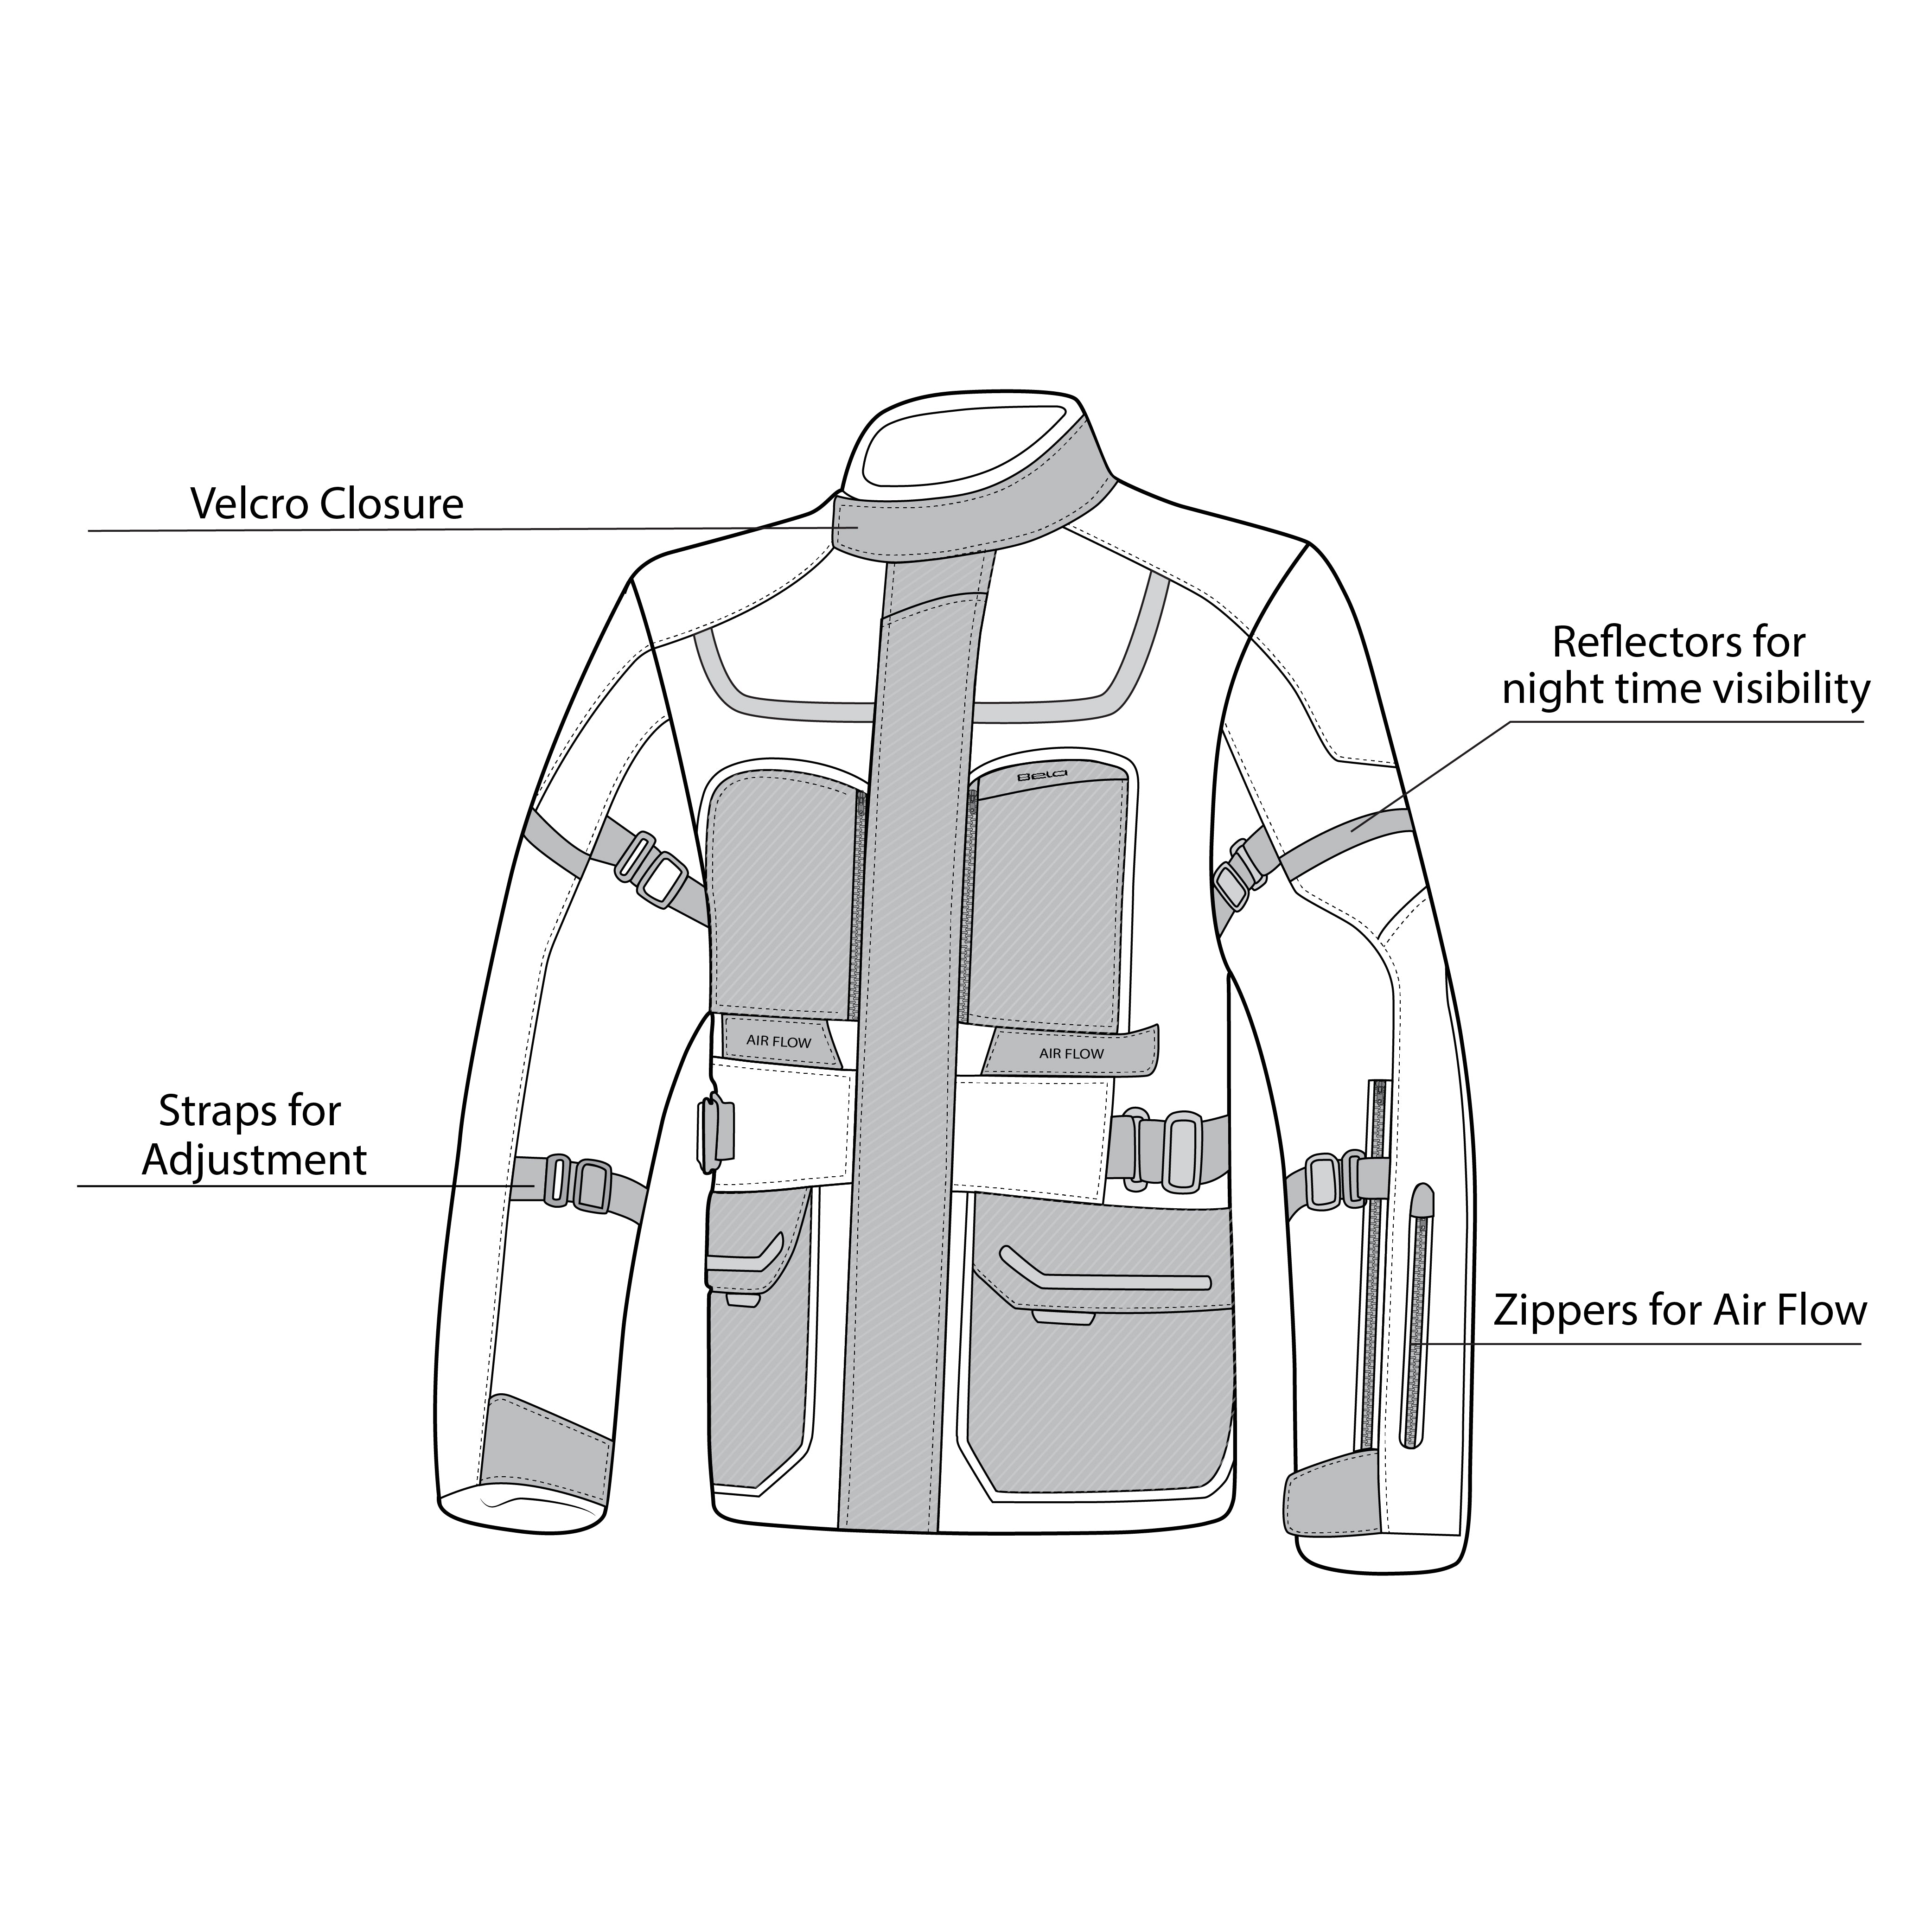 infographic sketch bela transformer the winter jacket black and yellow-flouro front side view